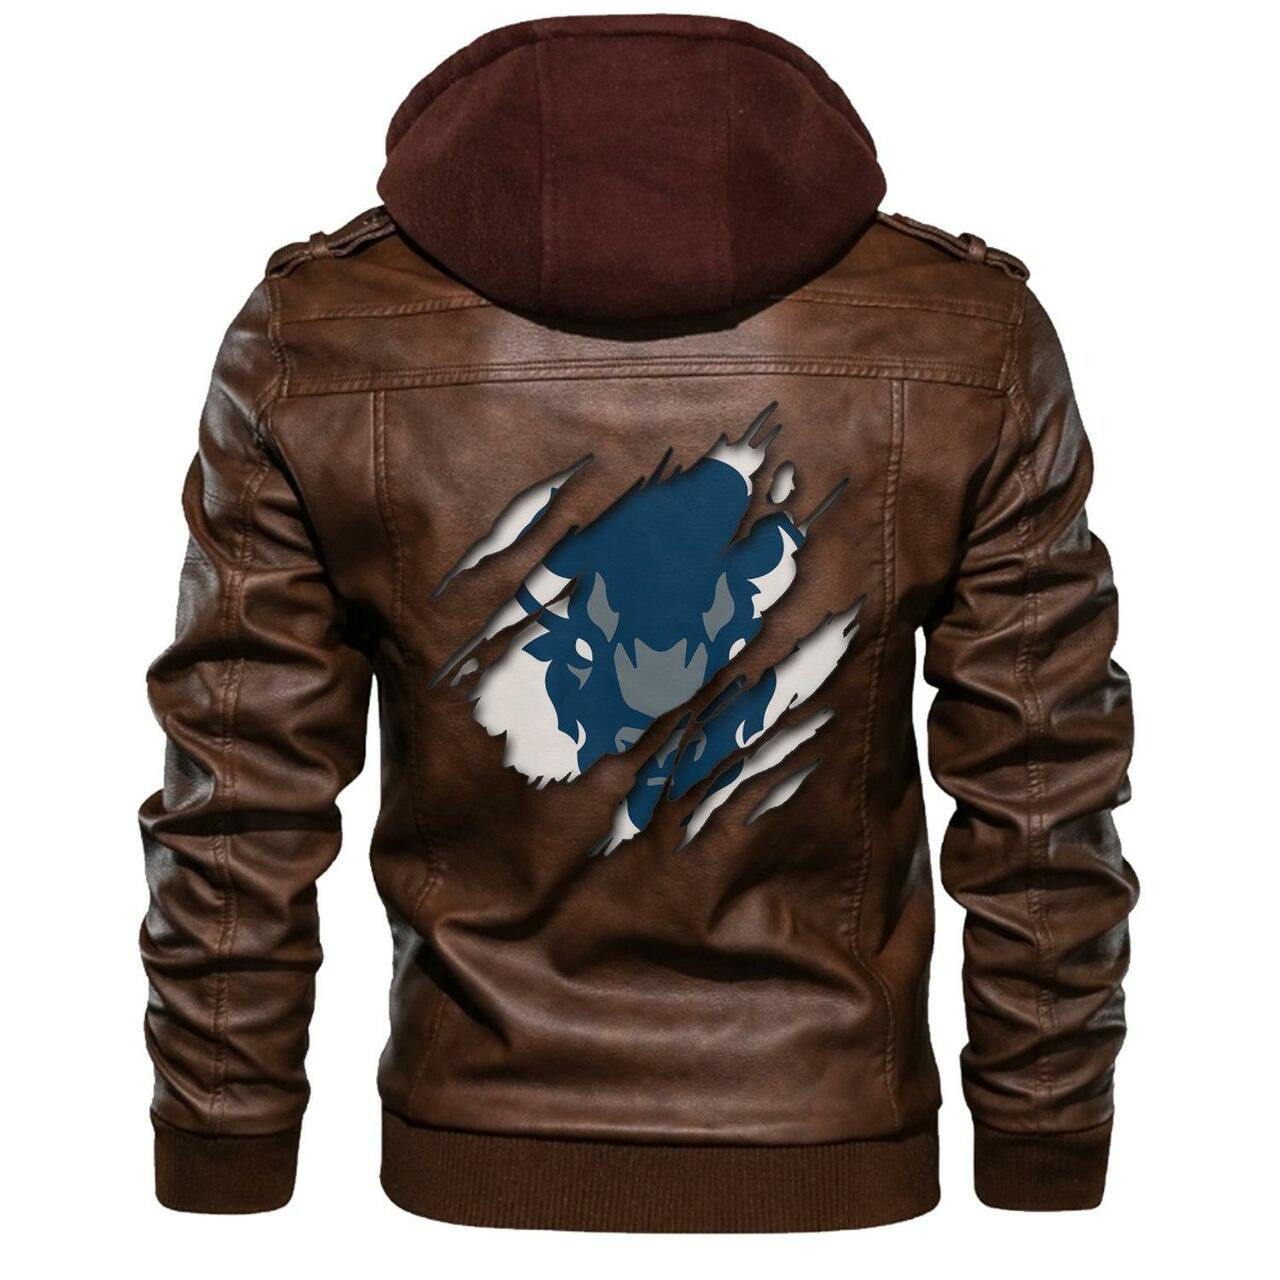 You can find Leather Jacket online at a great price 175